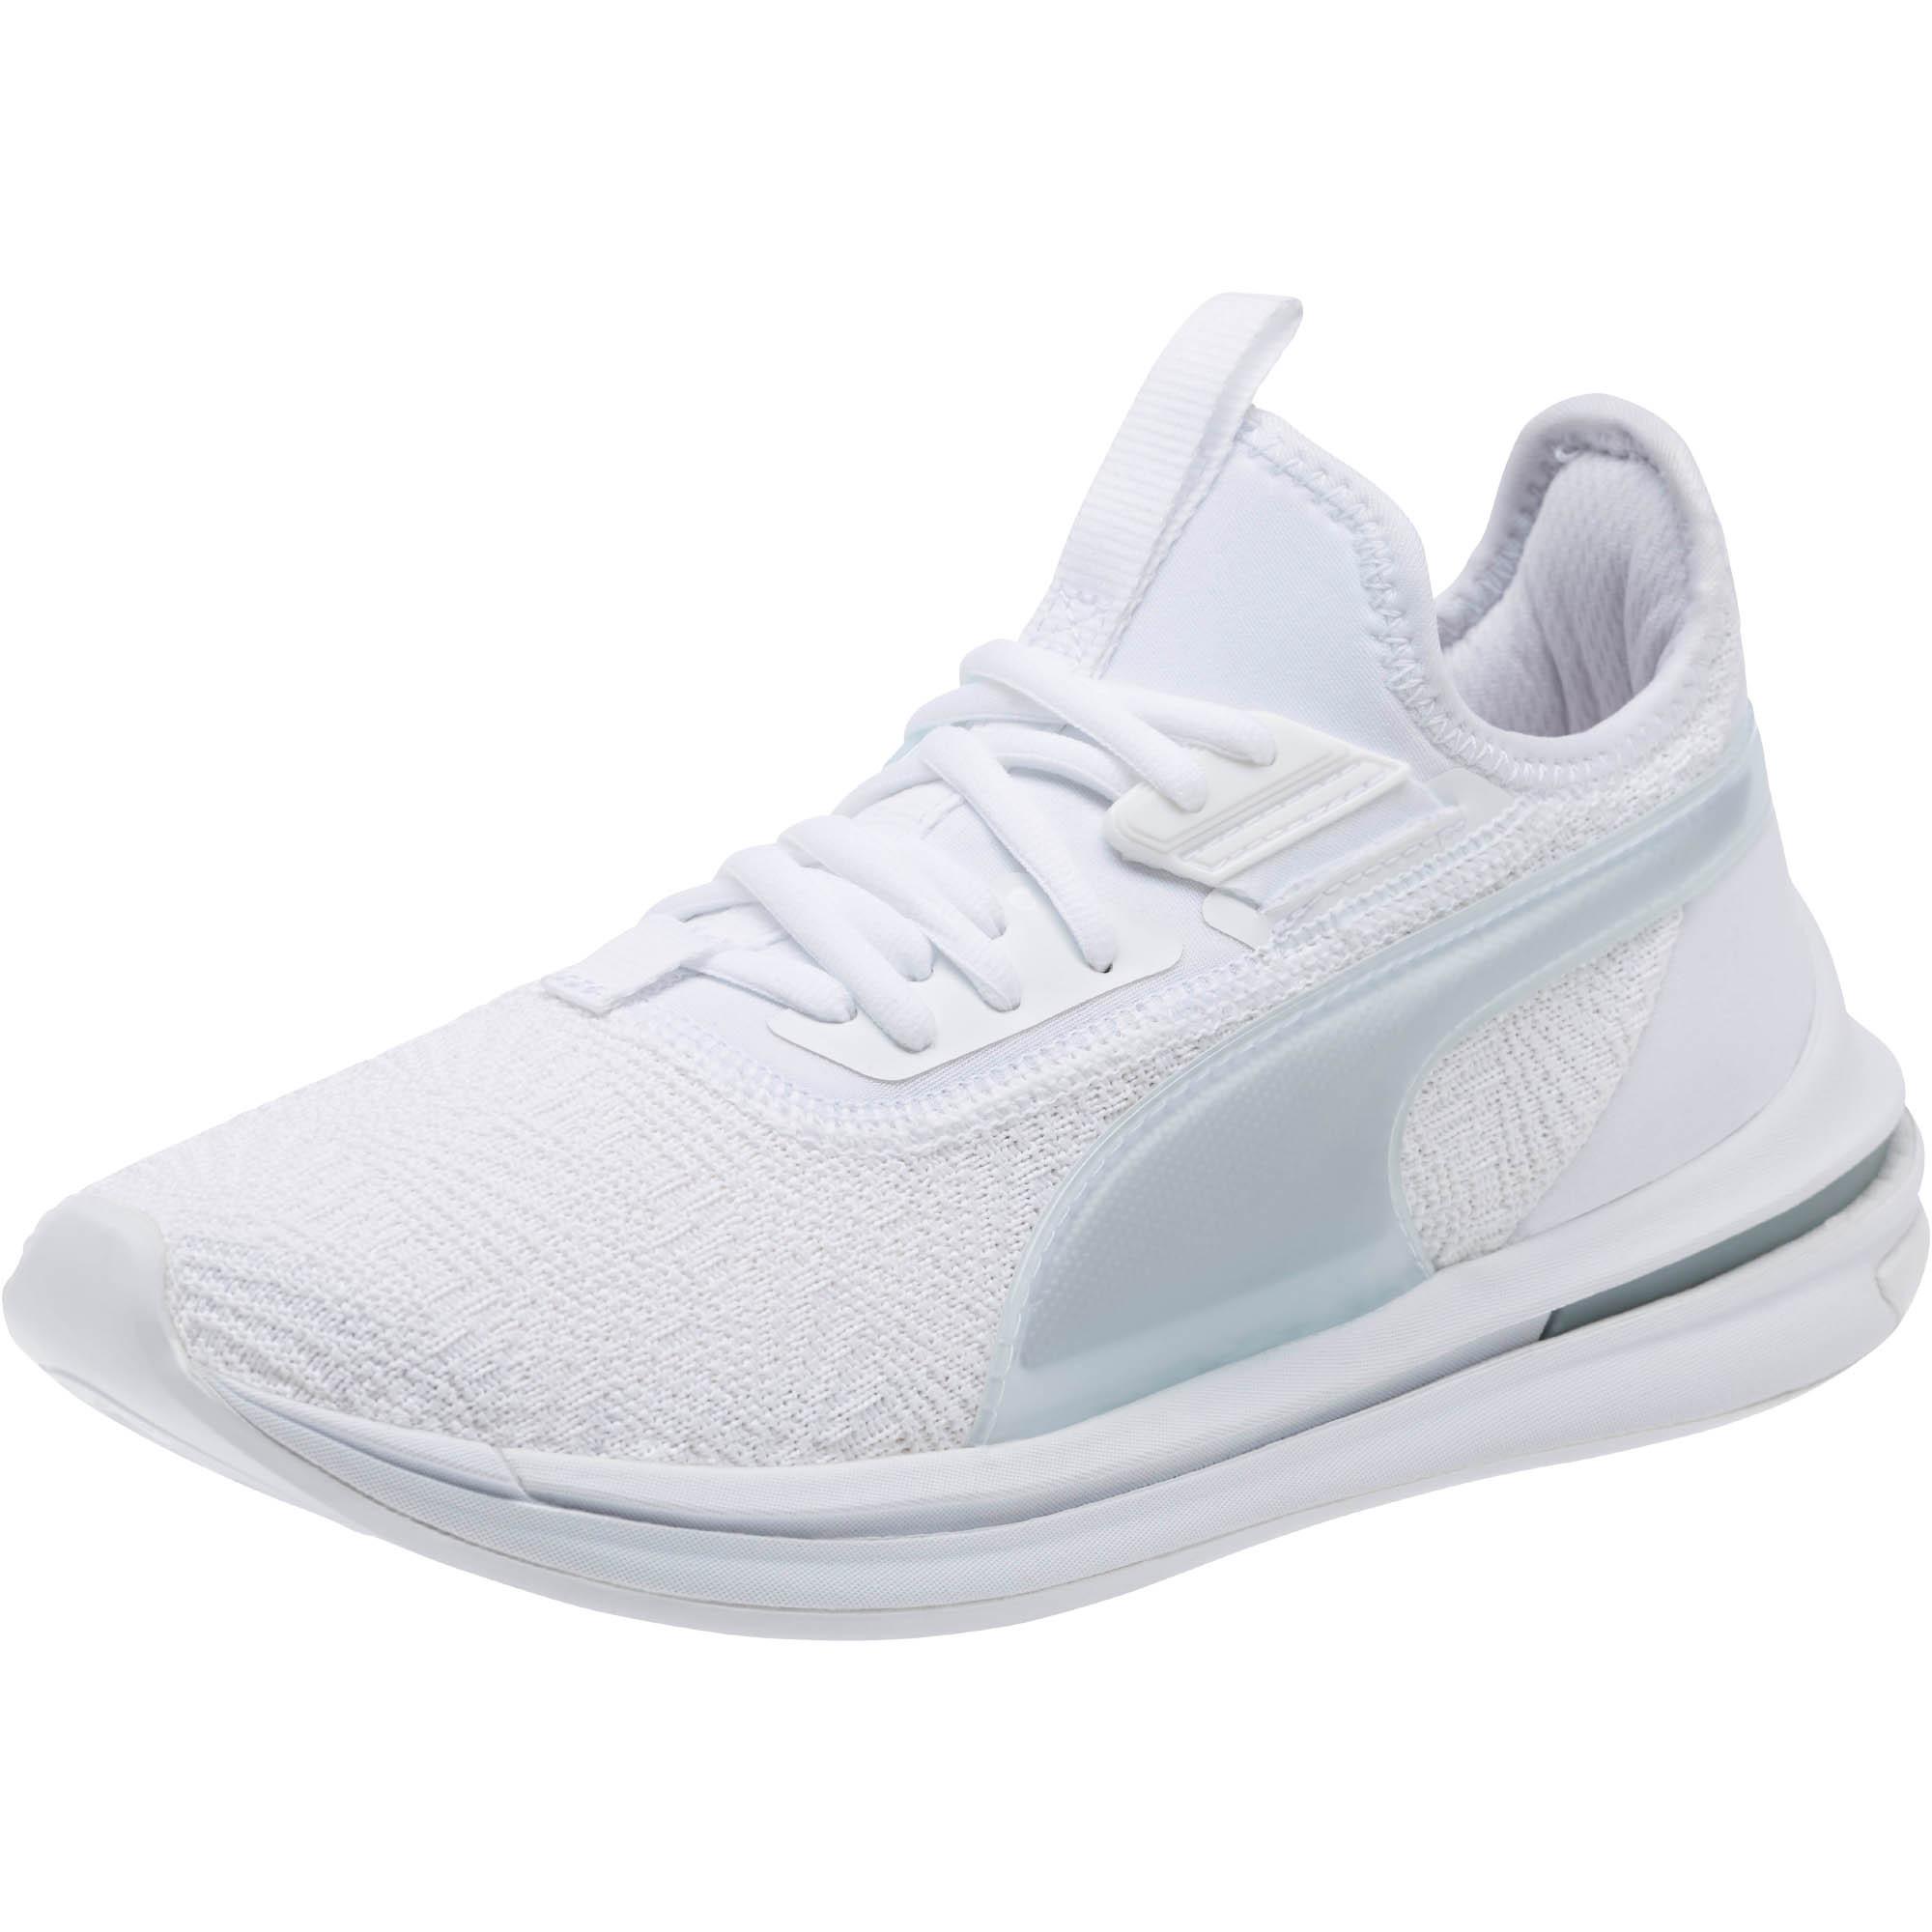 PUMA Lace Ignite Limitless Sr-71 Running Shoes in 04 (White) - Lyst